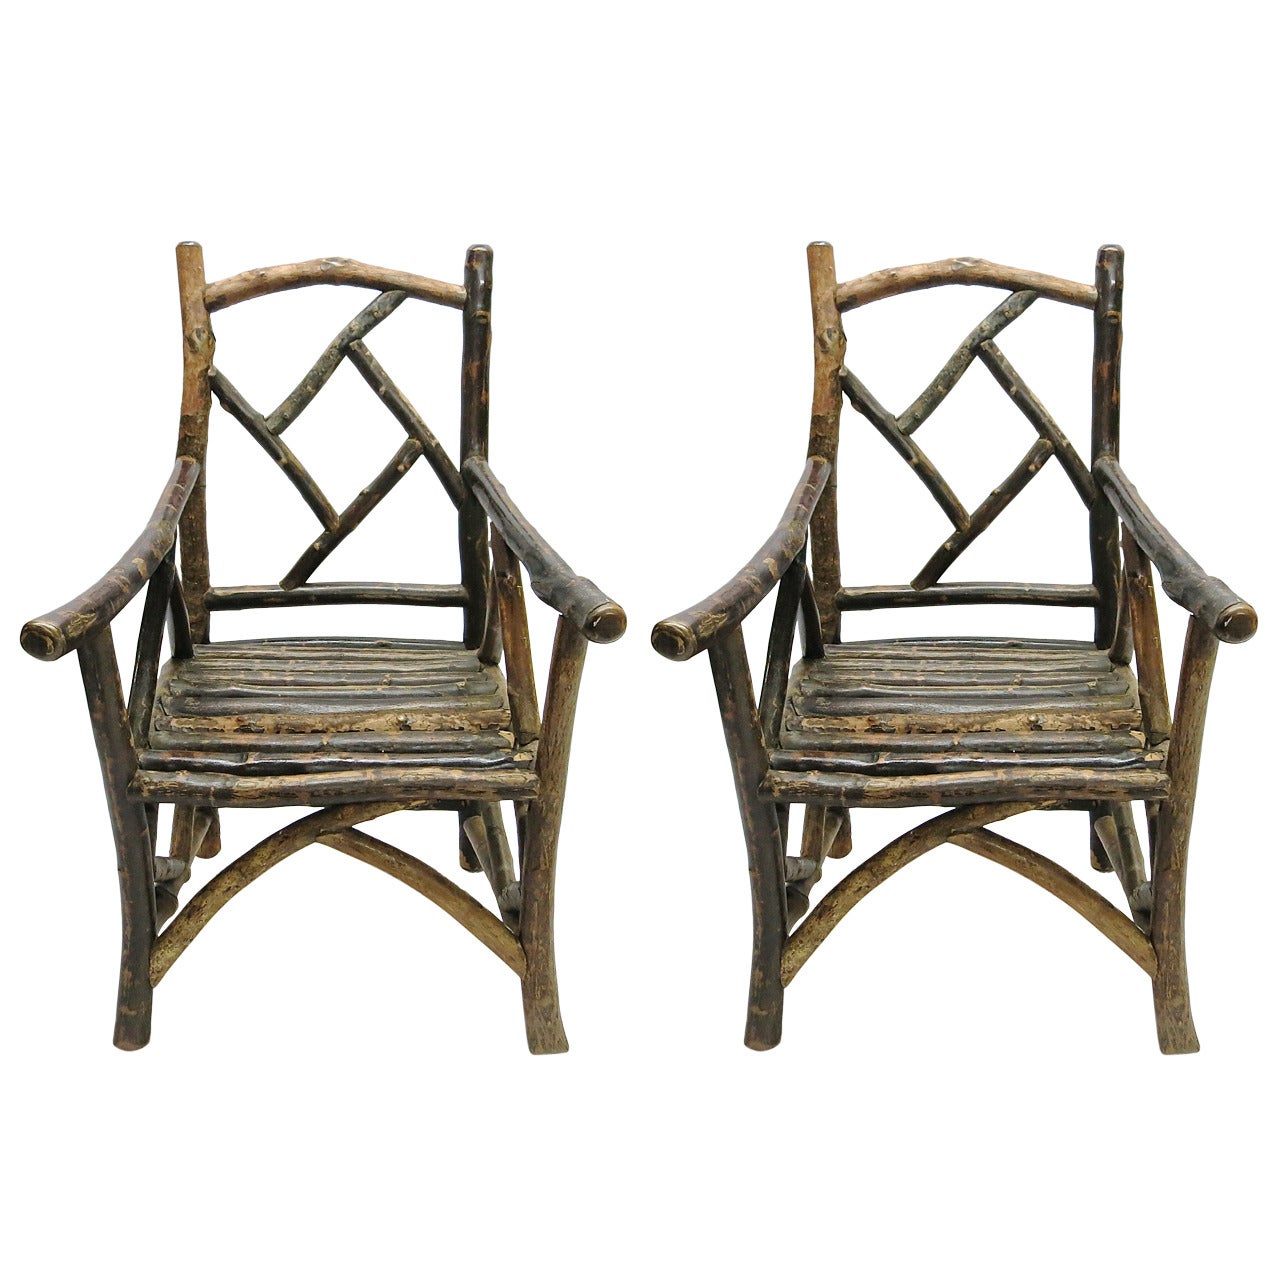 Pair of Solid Bark Chairs, USA Purchased in the 1990's